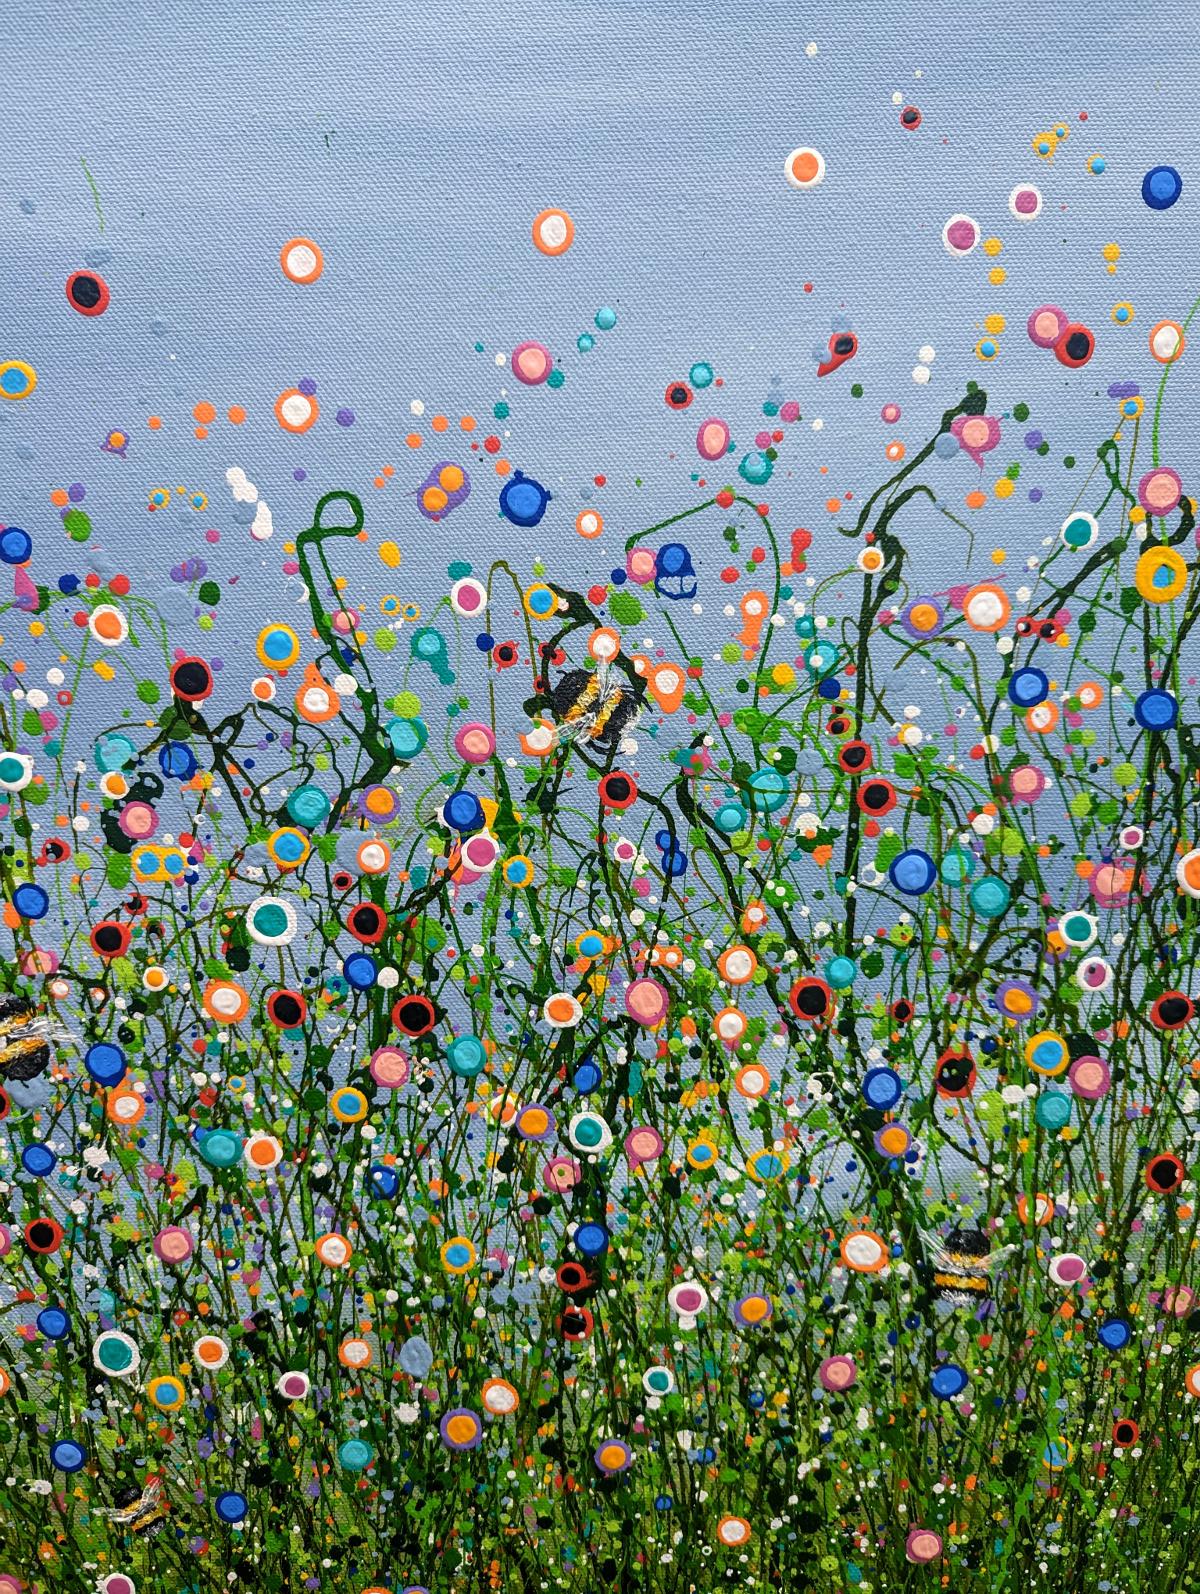 Bumbling Chaos #2, floral art, meadow art, original art, affordable art - Contemporary Painting by Lucy Moore